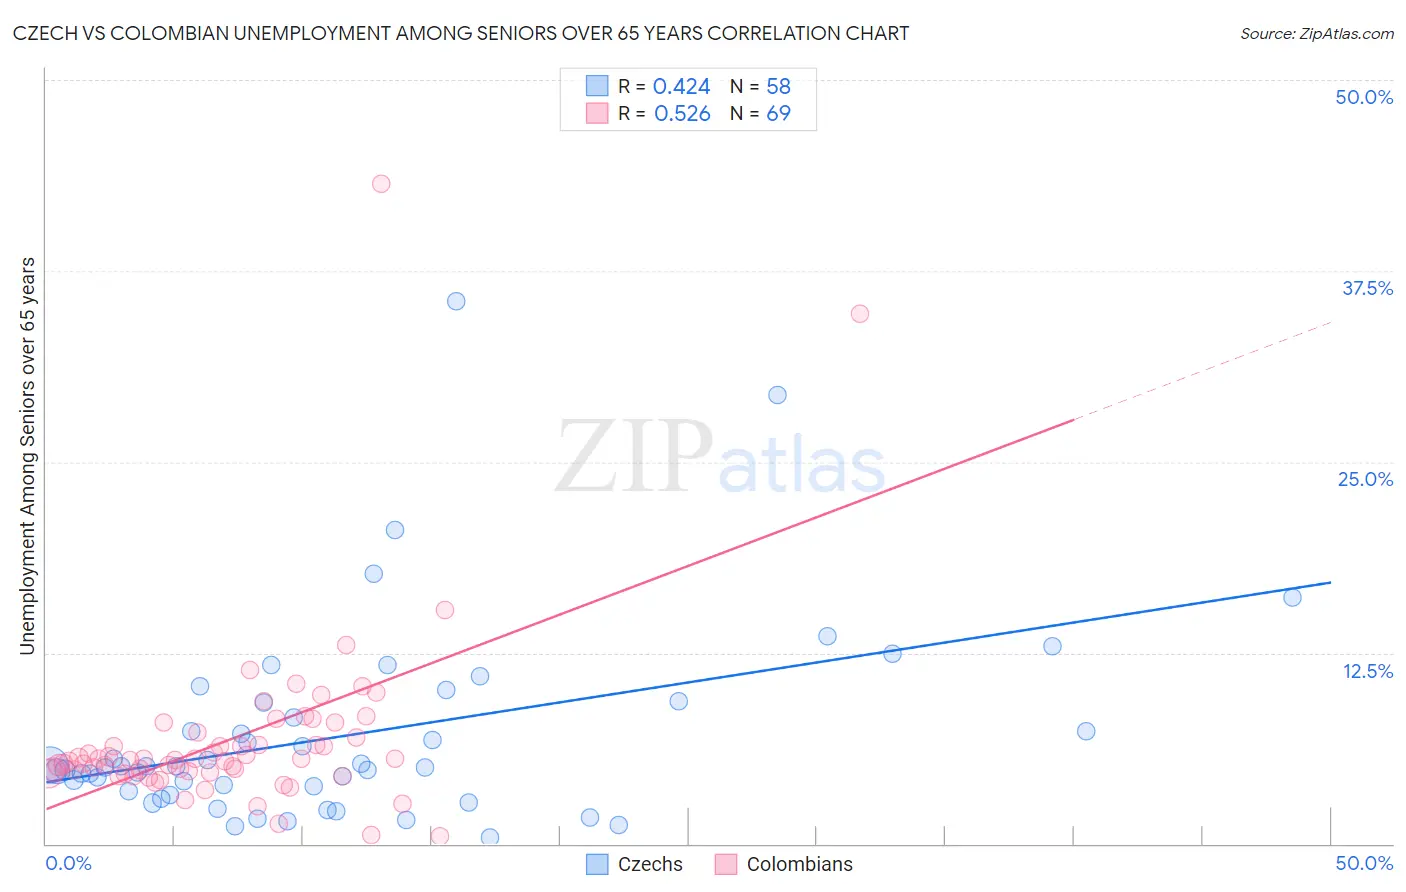 Czech vs Colombian Unemployment Among Seniors over 65 years